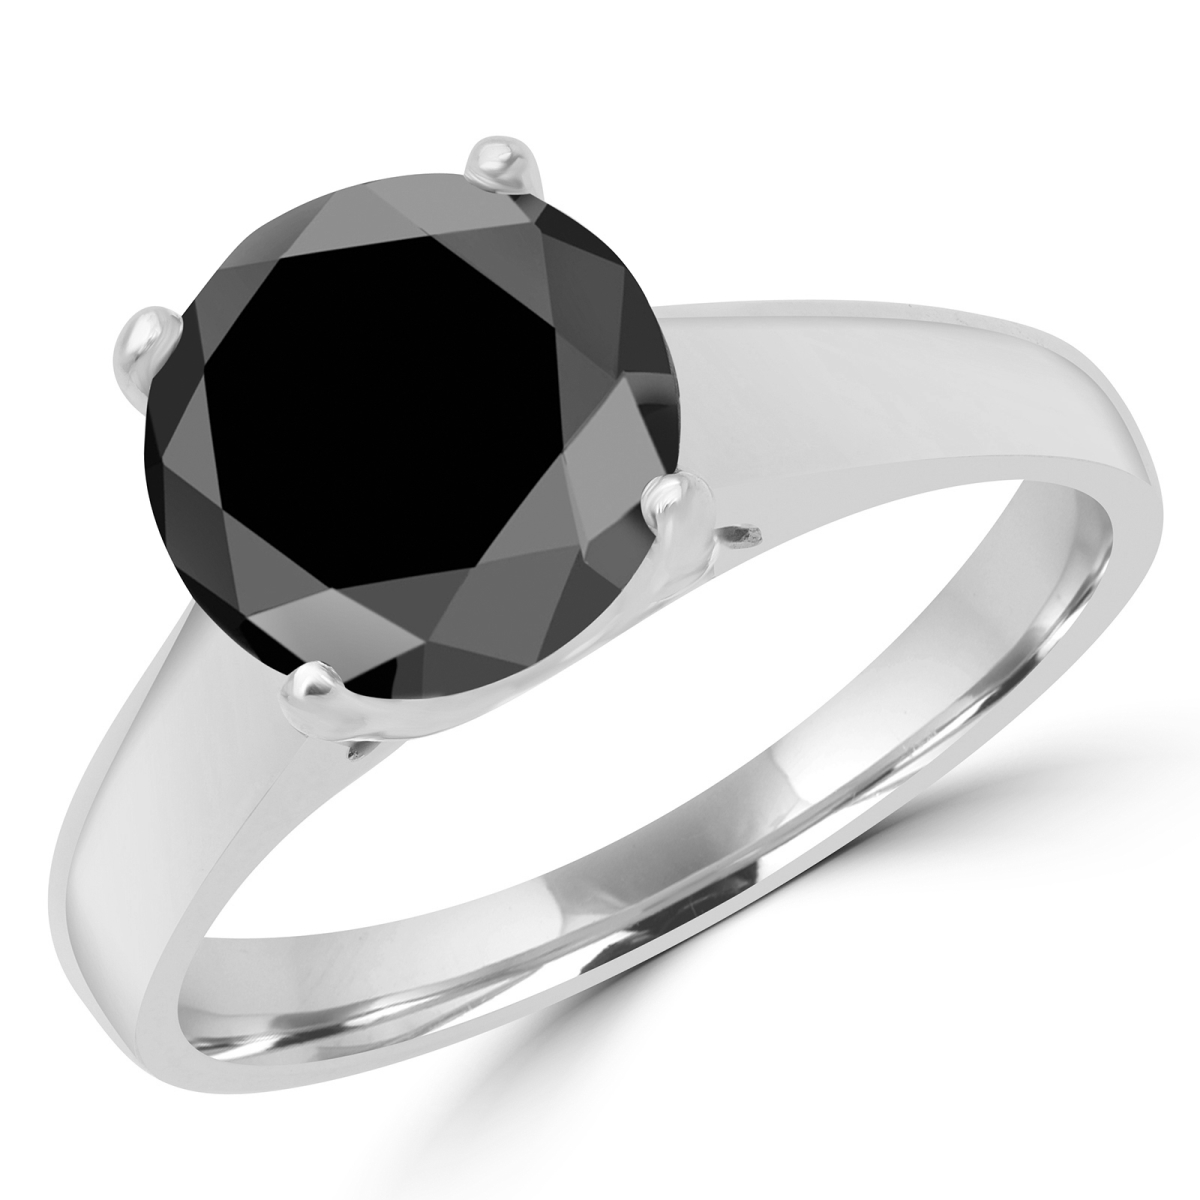 Picture of Majesty Diamonds MD170224-8.5 1 0.5 CT Round Black Diamond Solitaire Engagement Ring in 14K White Gold - Size 8.5